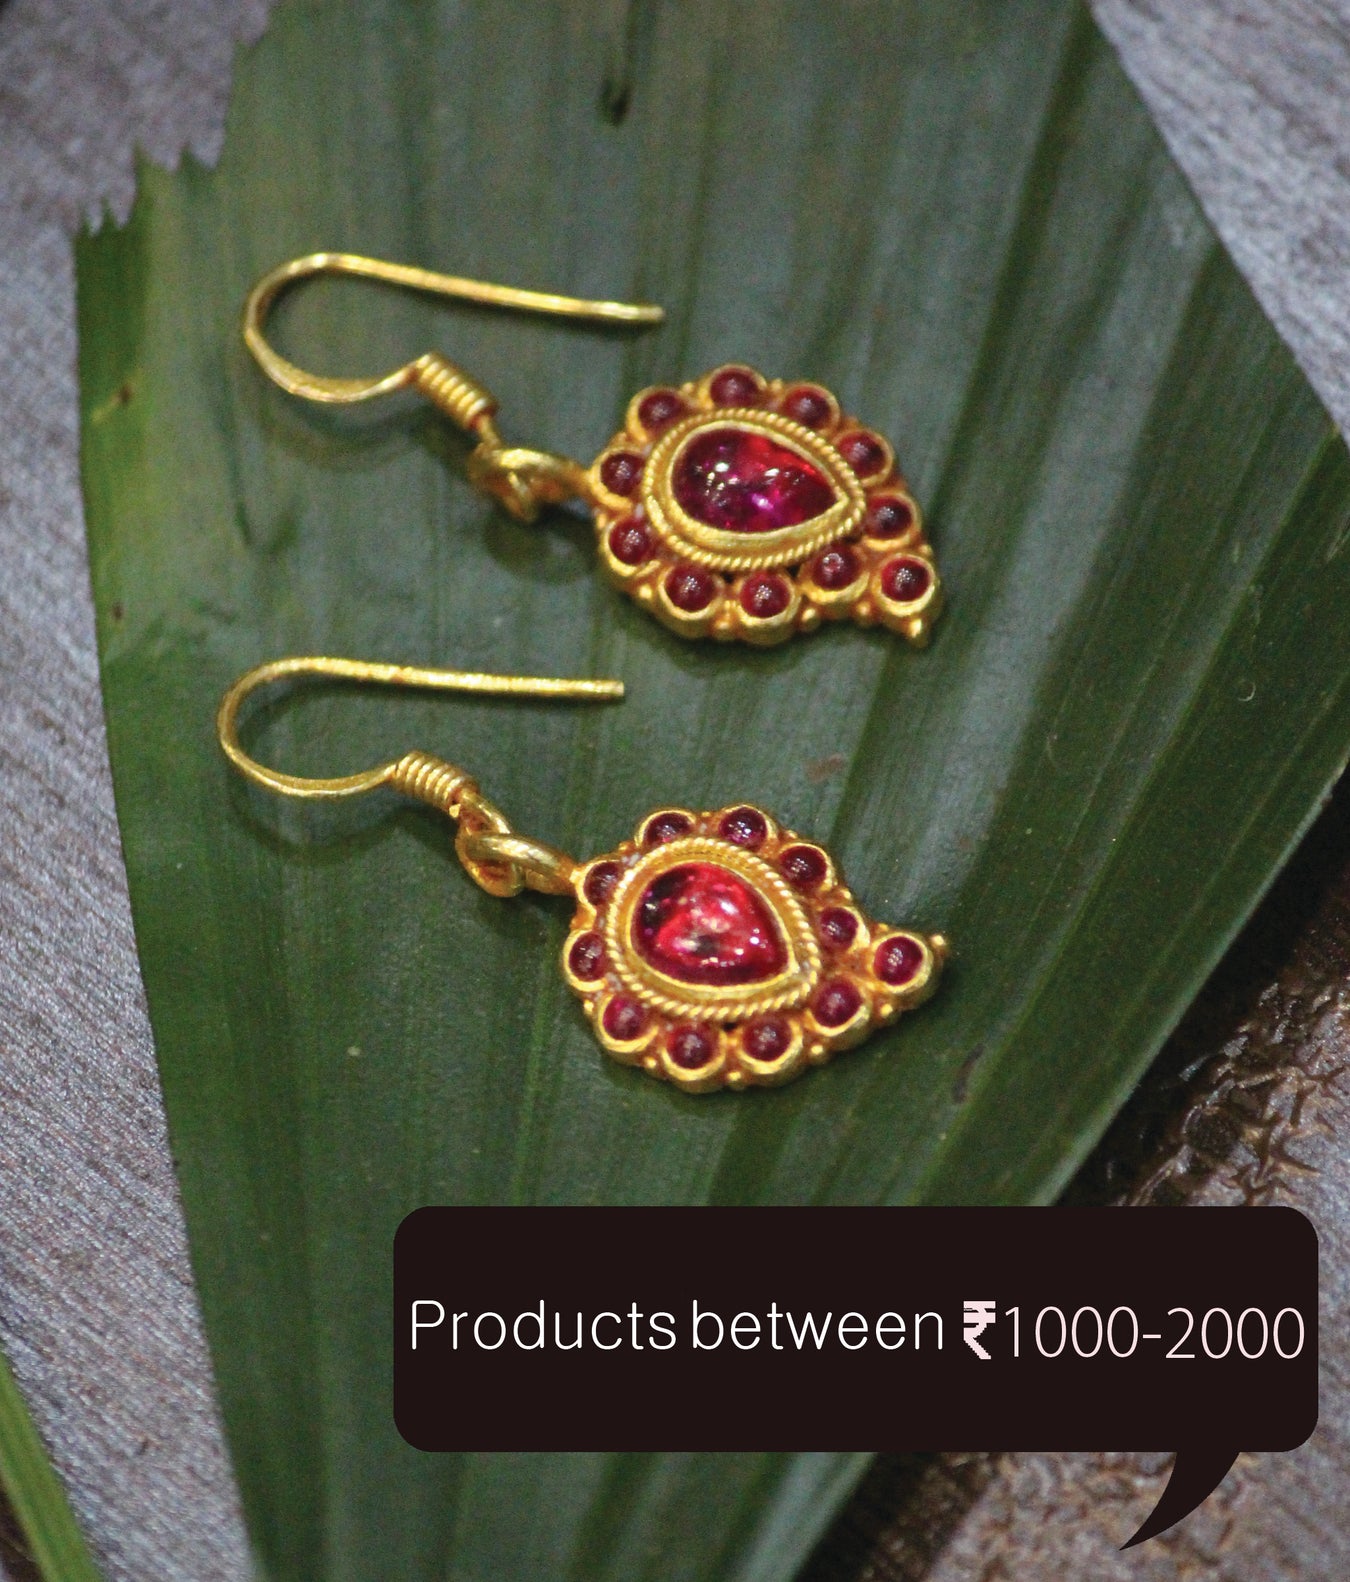 Products between Rs. 1000 - Rs. 2000